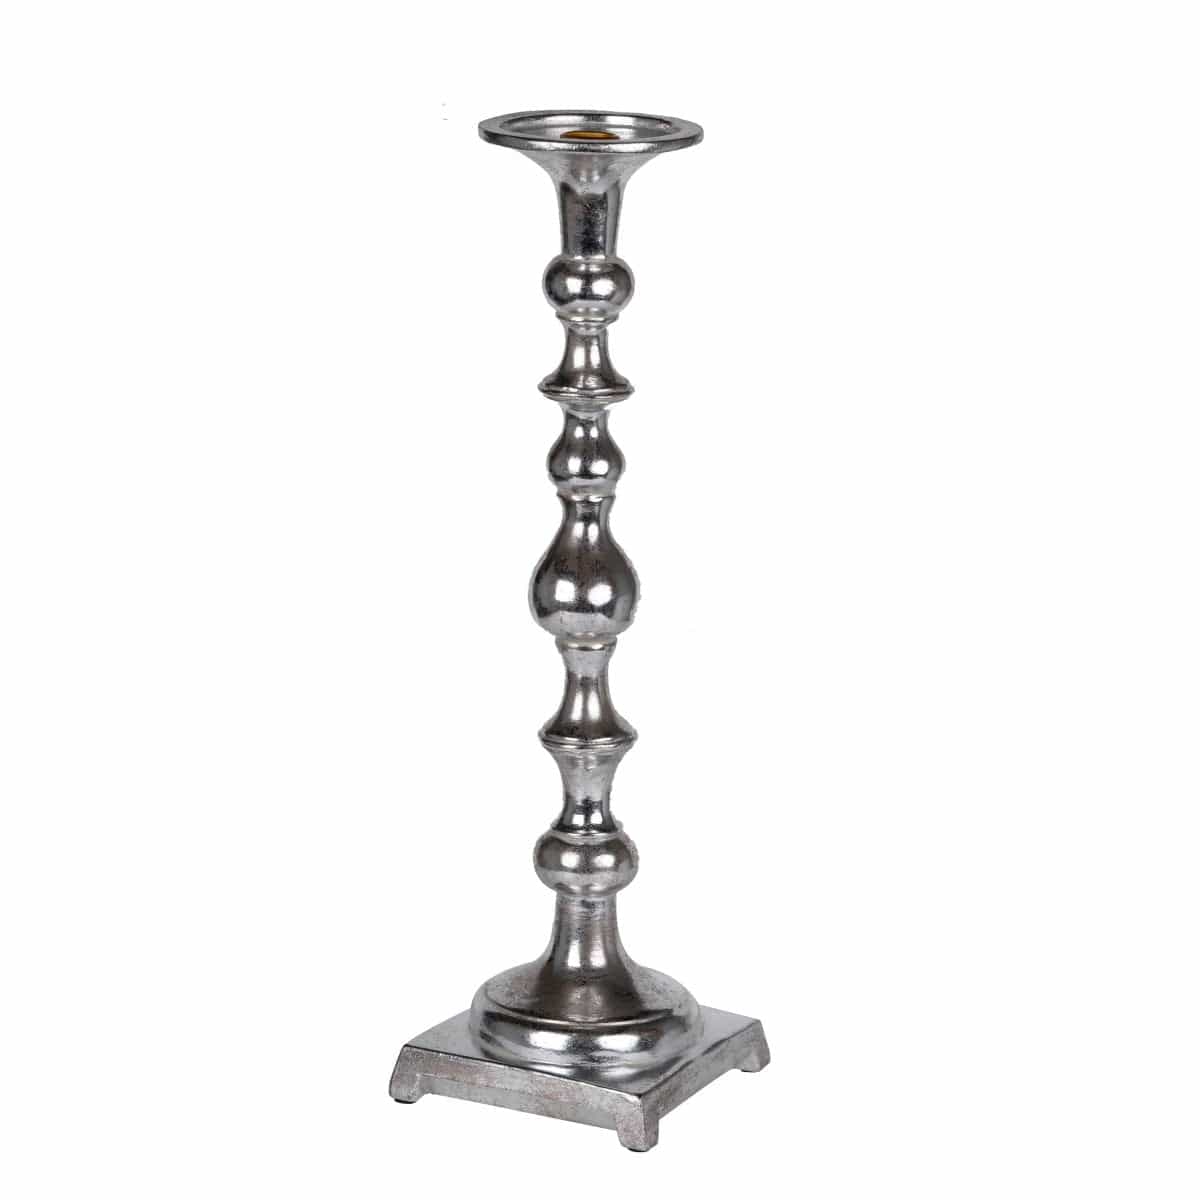 AB-76375 Danbury Candle Holder, Silver picket and rail